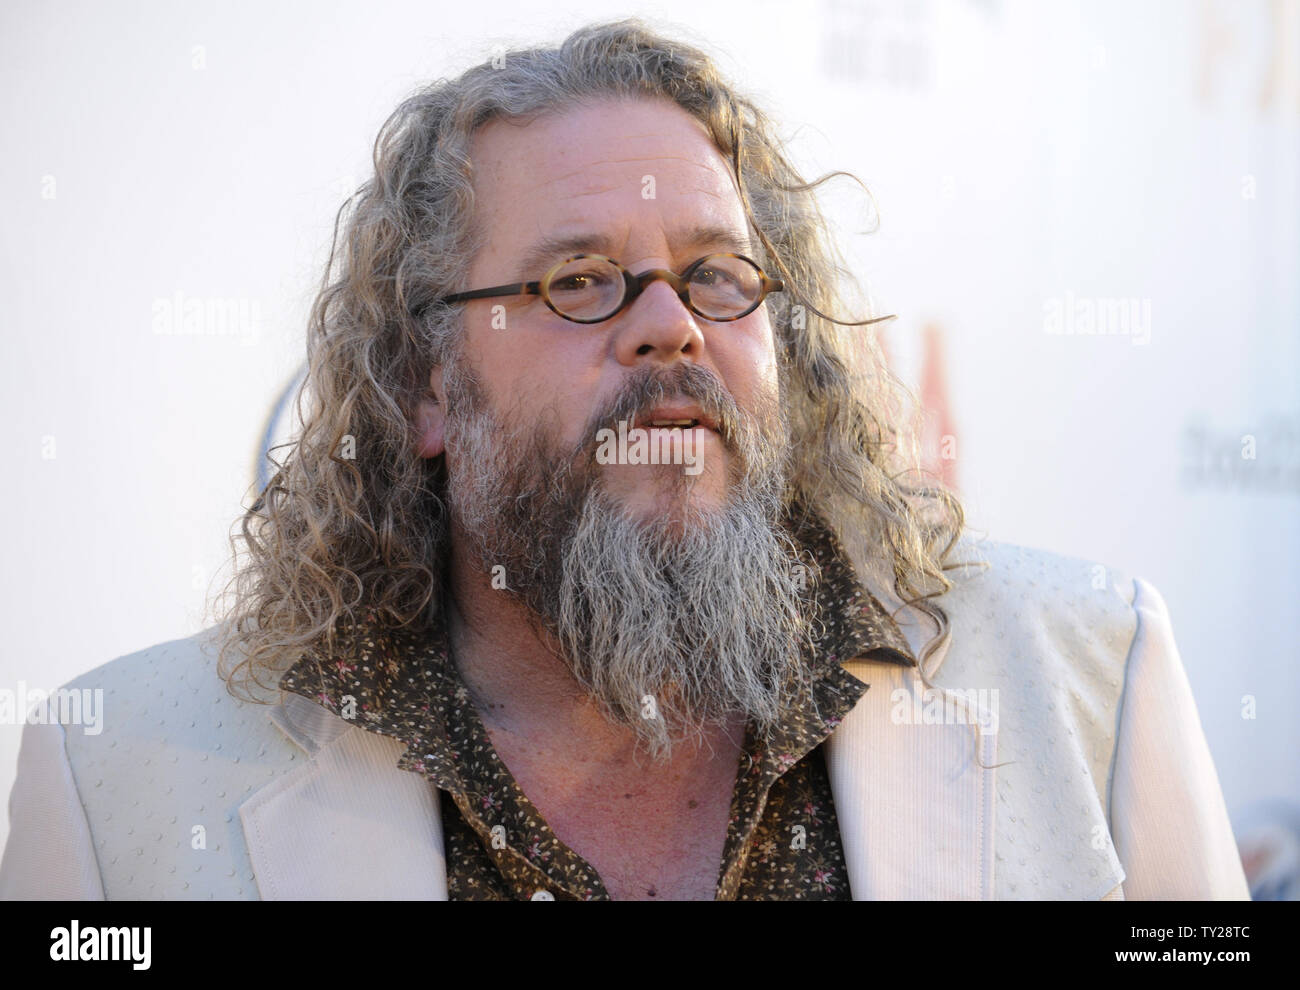 Cast member Mark Boone Junior attends the Sons of Anarchy, Season 4 premiere screening at the Arclight Theatre in the Hollywood section of Los Angeles on August 30, 2011.      UPI/Phil McCarten Stock Photo